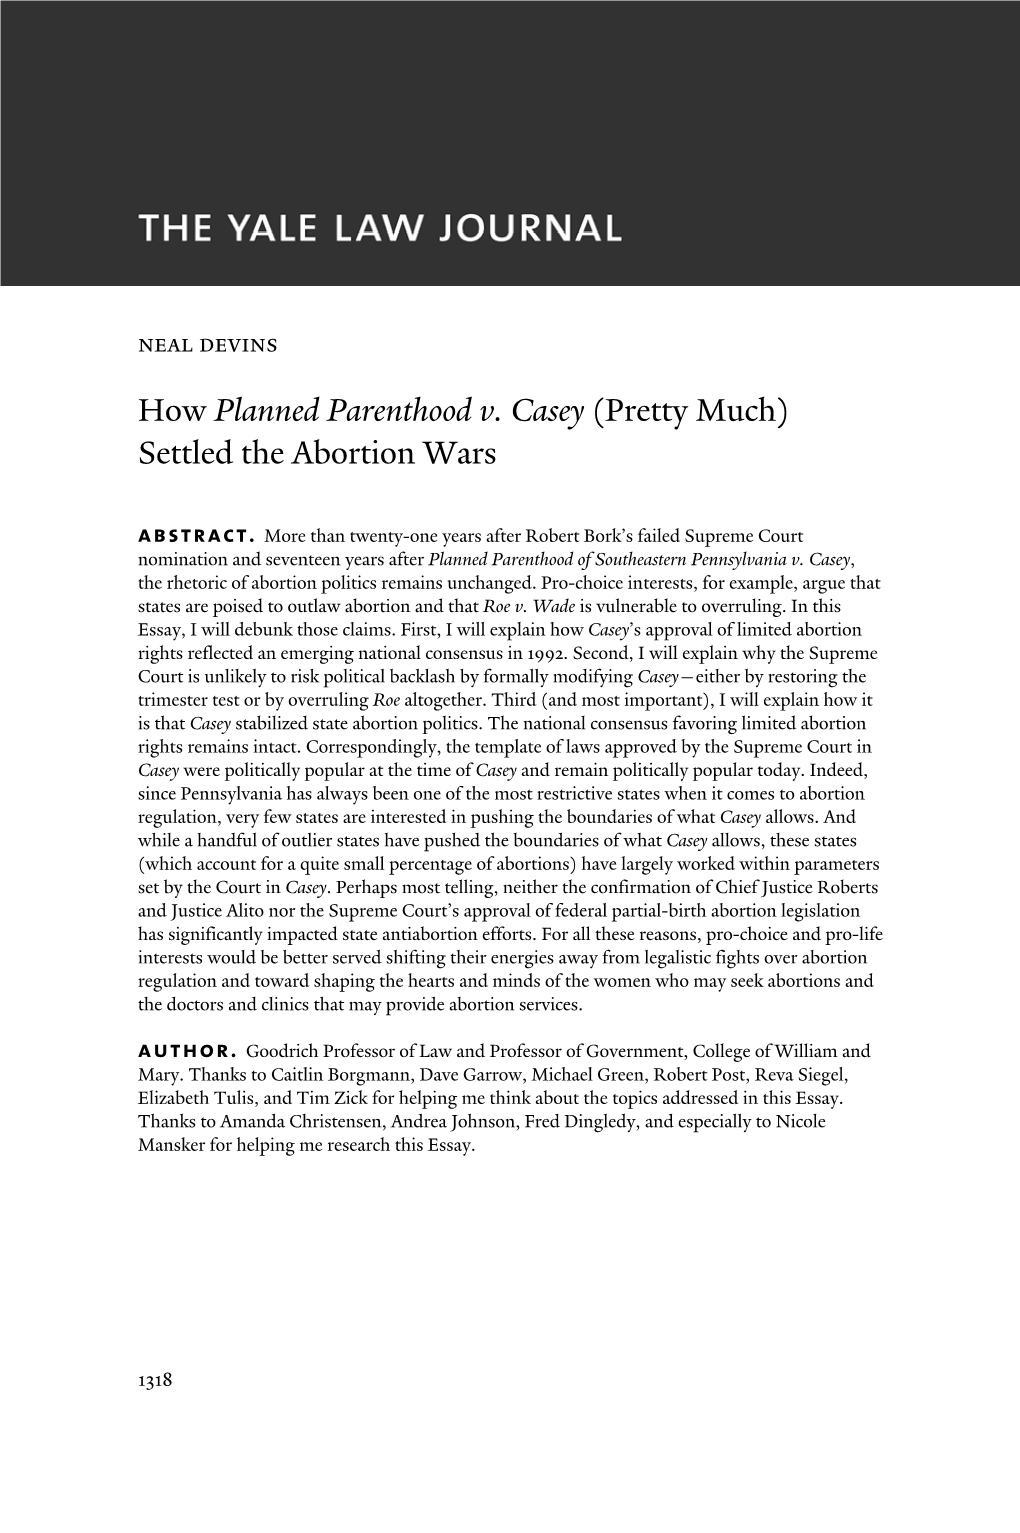 How Planned Parenthood V. Casey (Pretty Much) Settled the Abortion Wars Abstract